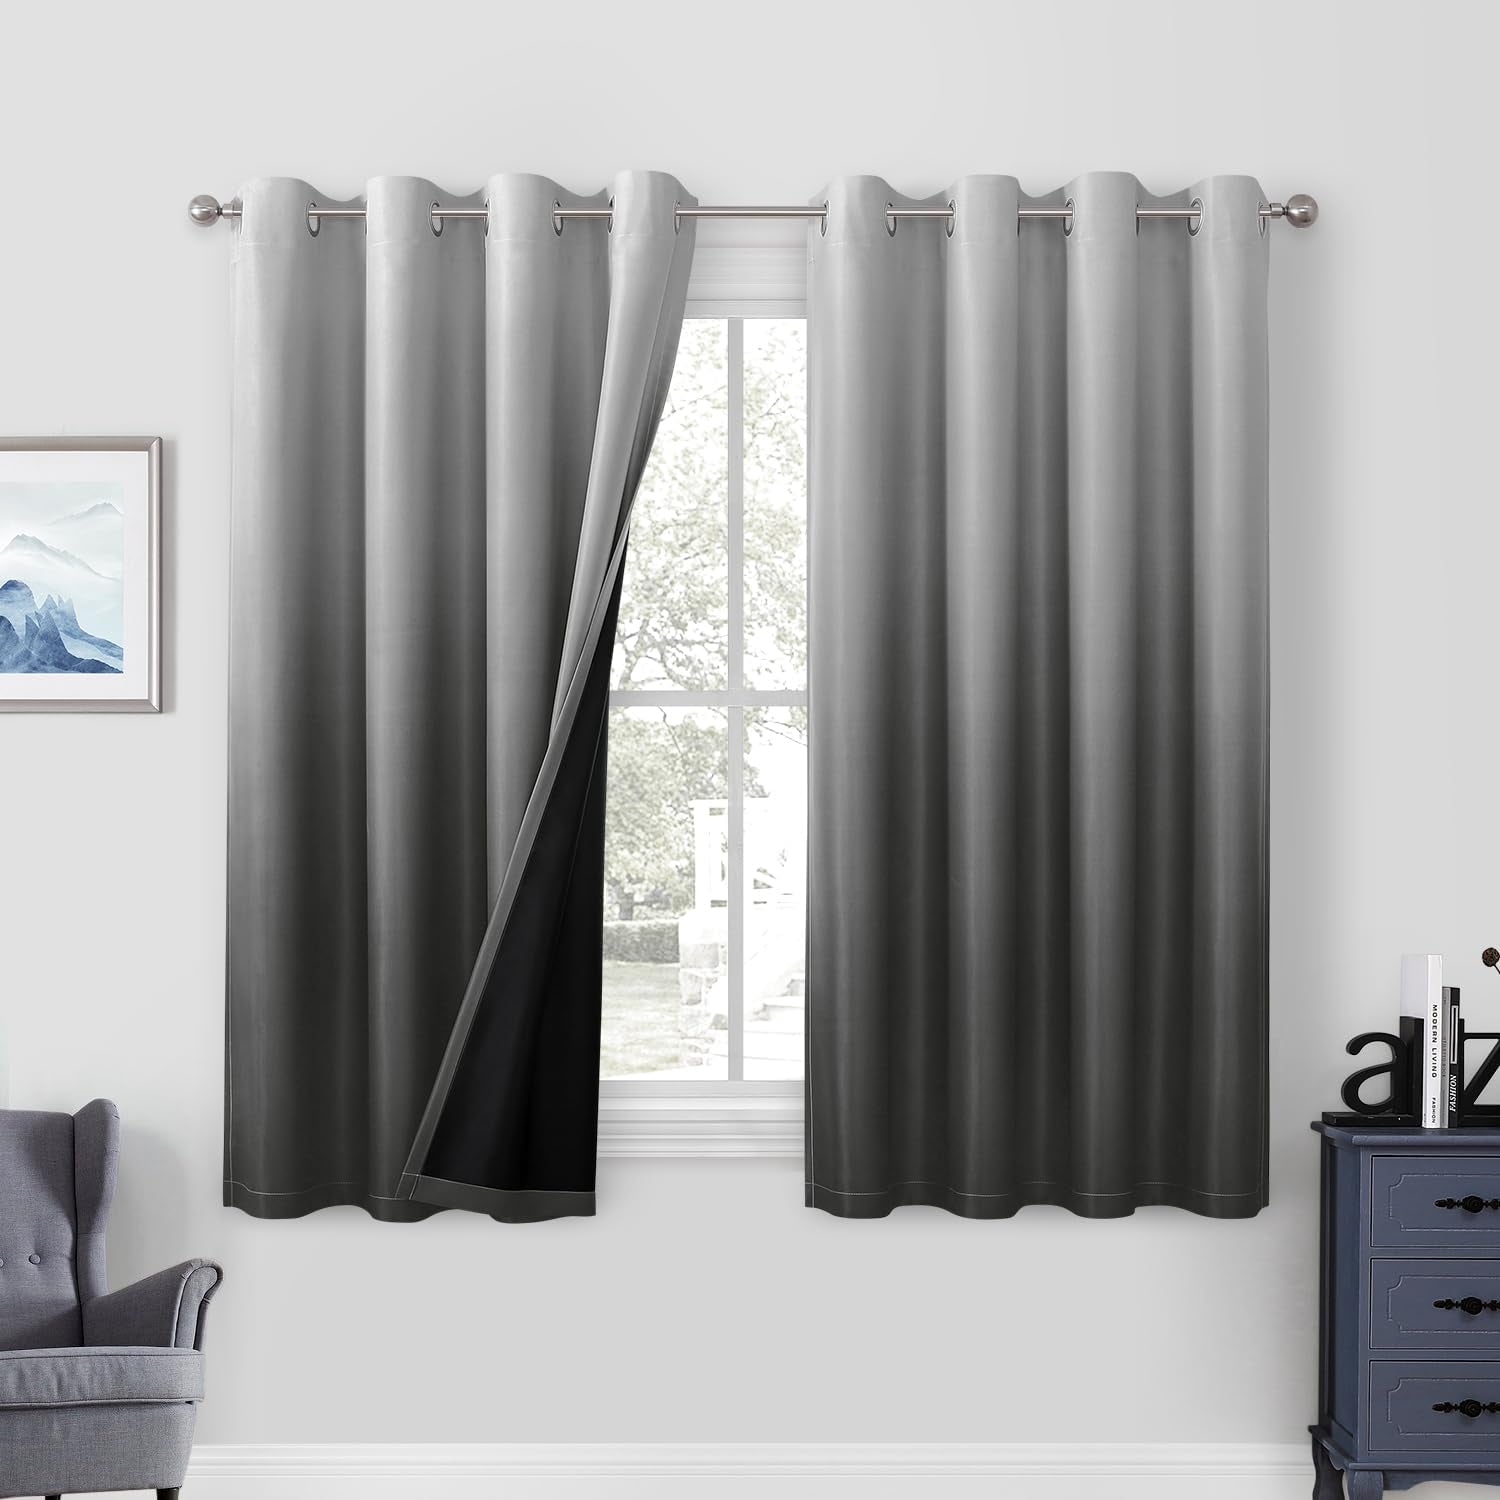 HOMEIDEAS 100% Black Ombre Blackout Curtains for Bedroom, Room Darkening Curtains 52 X 84 Inches Long Grommet Gradient Drapes, Light Blocking Thermal Insulated Curtains for Living Room, 2 Panels  HOMEIDEAS Grey 2 Panel-52" X 63" 